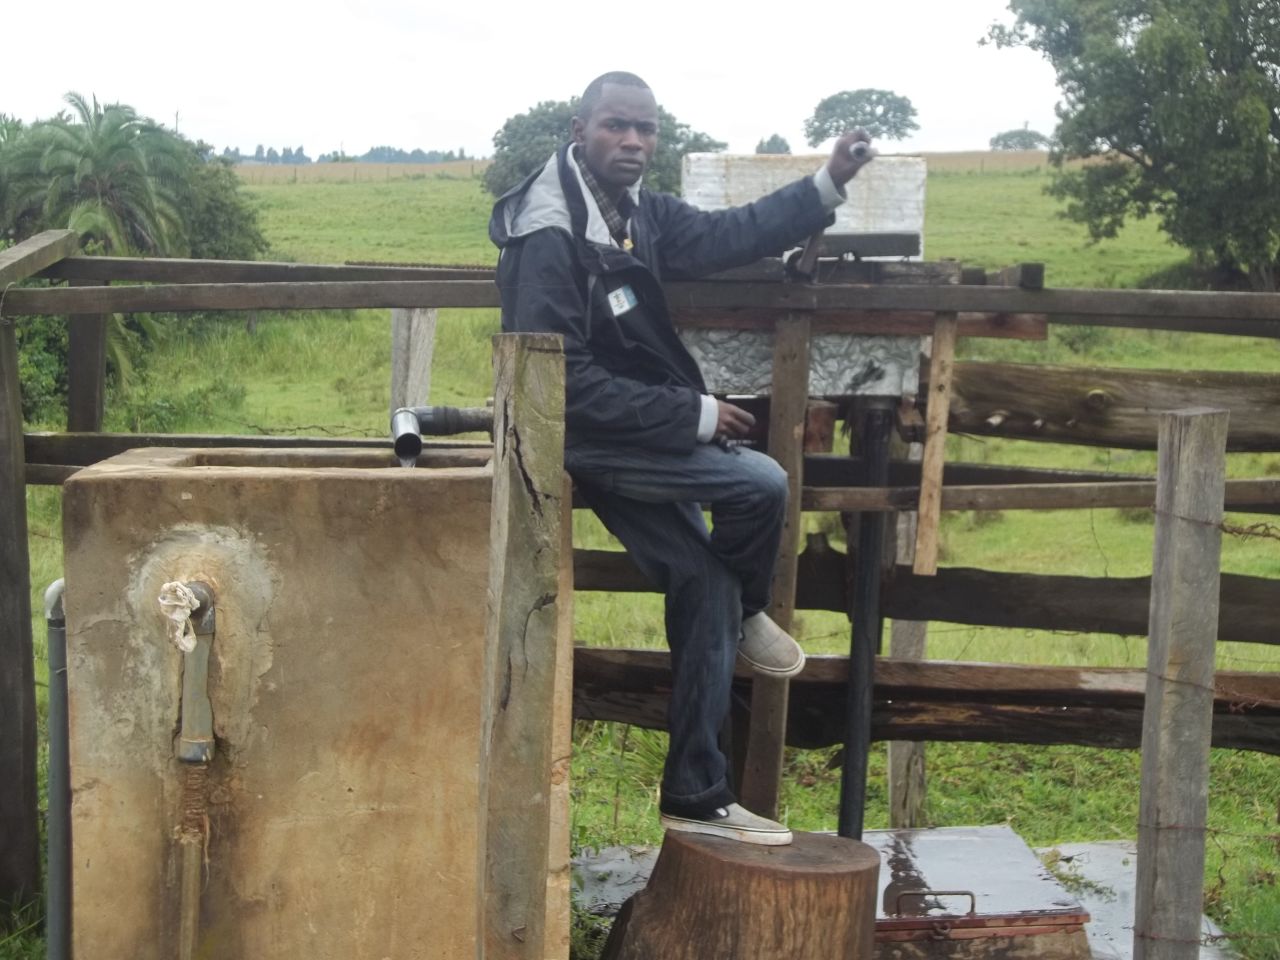 Kenyan entrepreneur Joe Mwali poses beside the borehole he created to provide water for his local community.